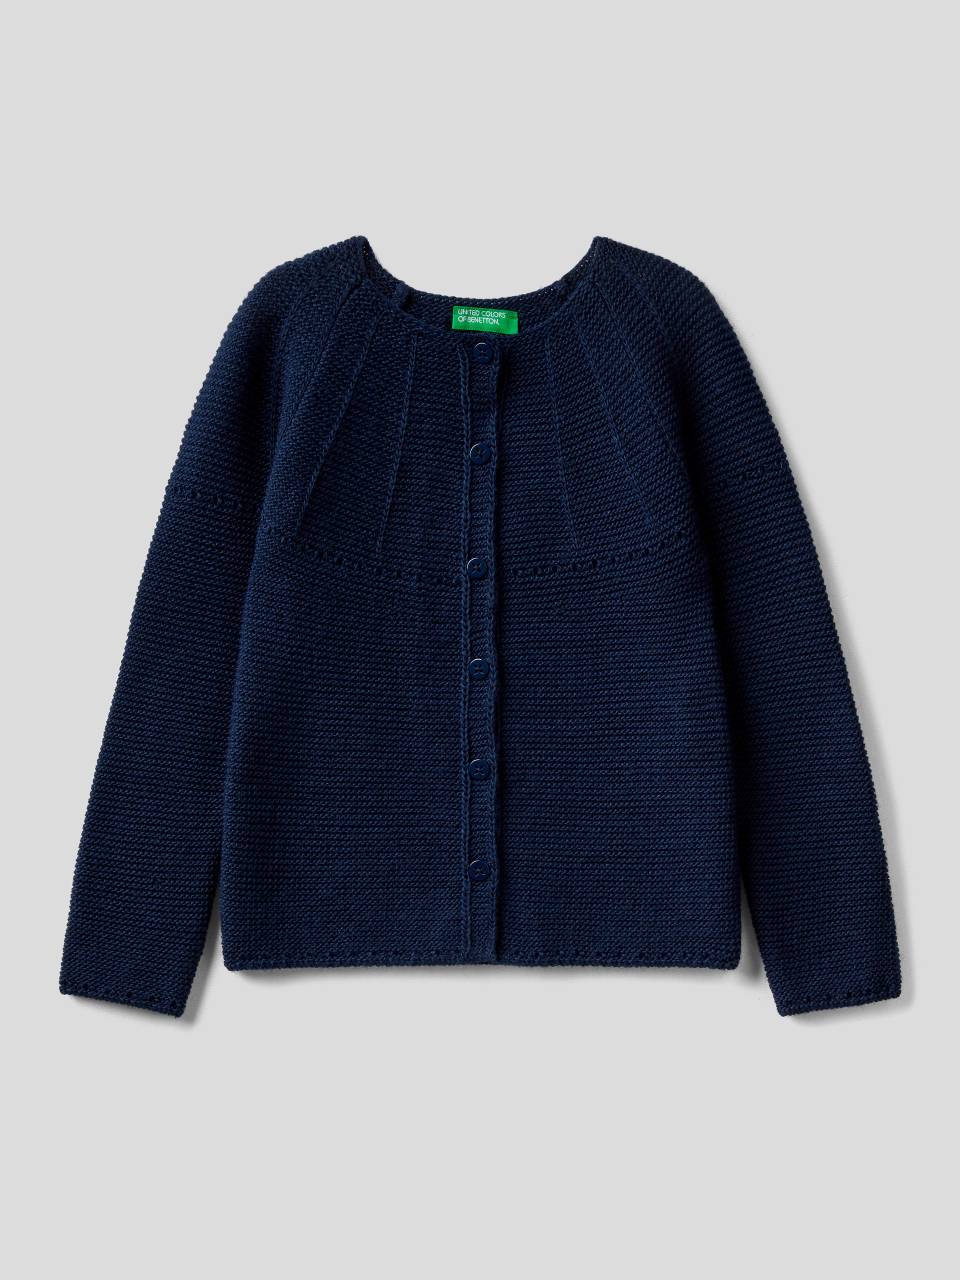 Benetton Cardigan with perforated details. 1